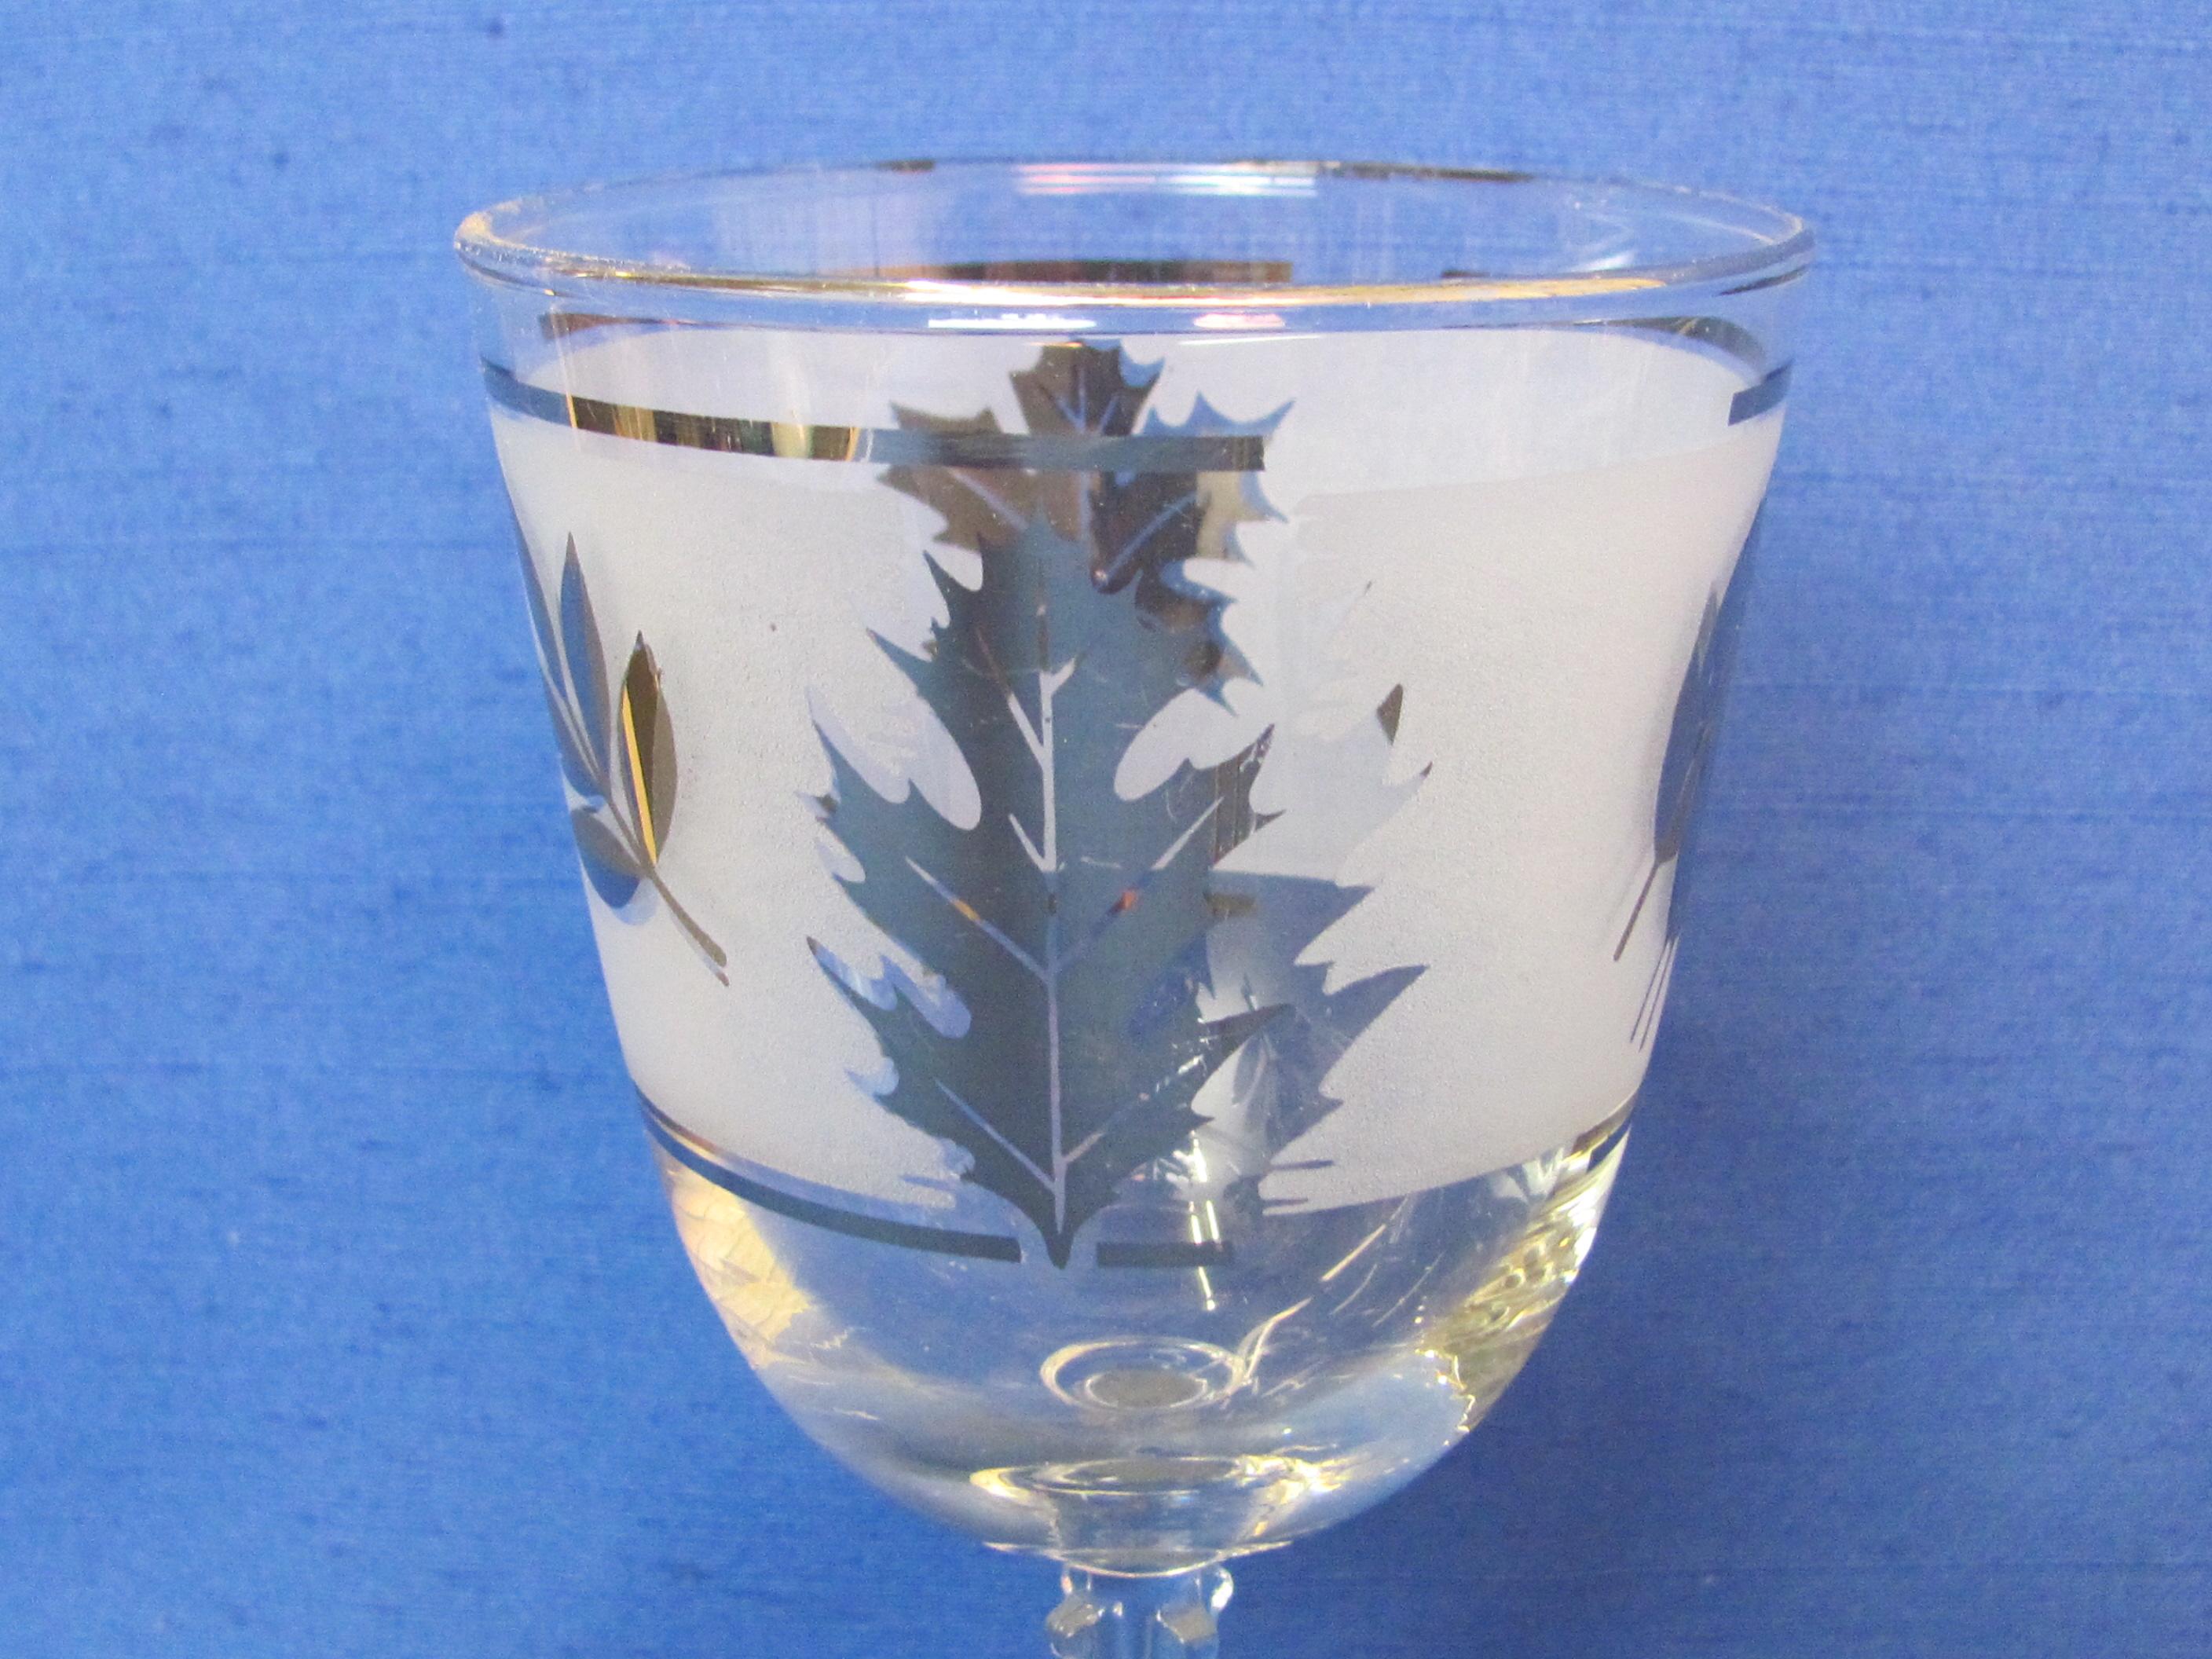 Set of 7 “Silver Leaf” Water Goblets by Libbey Glass – 7 1/4” tall